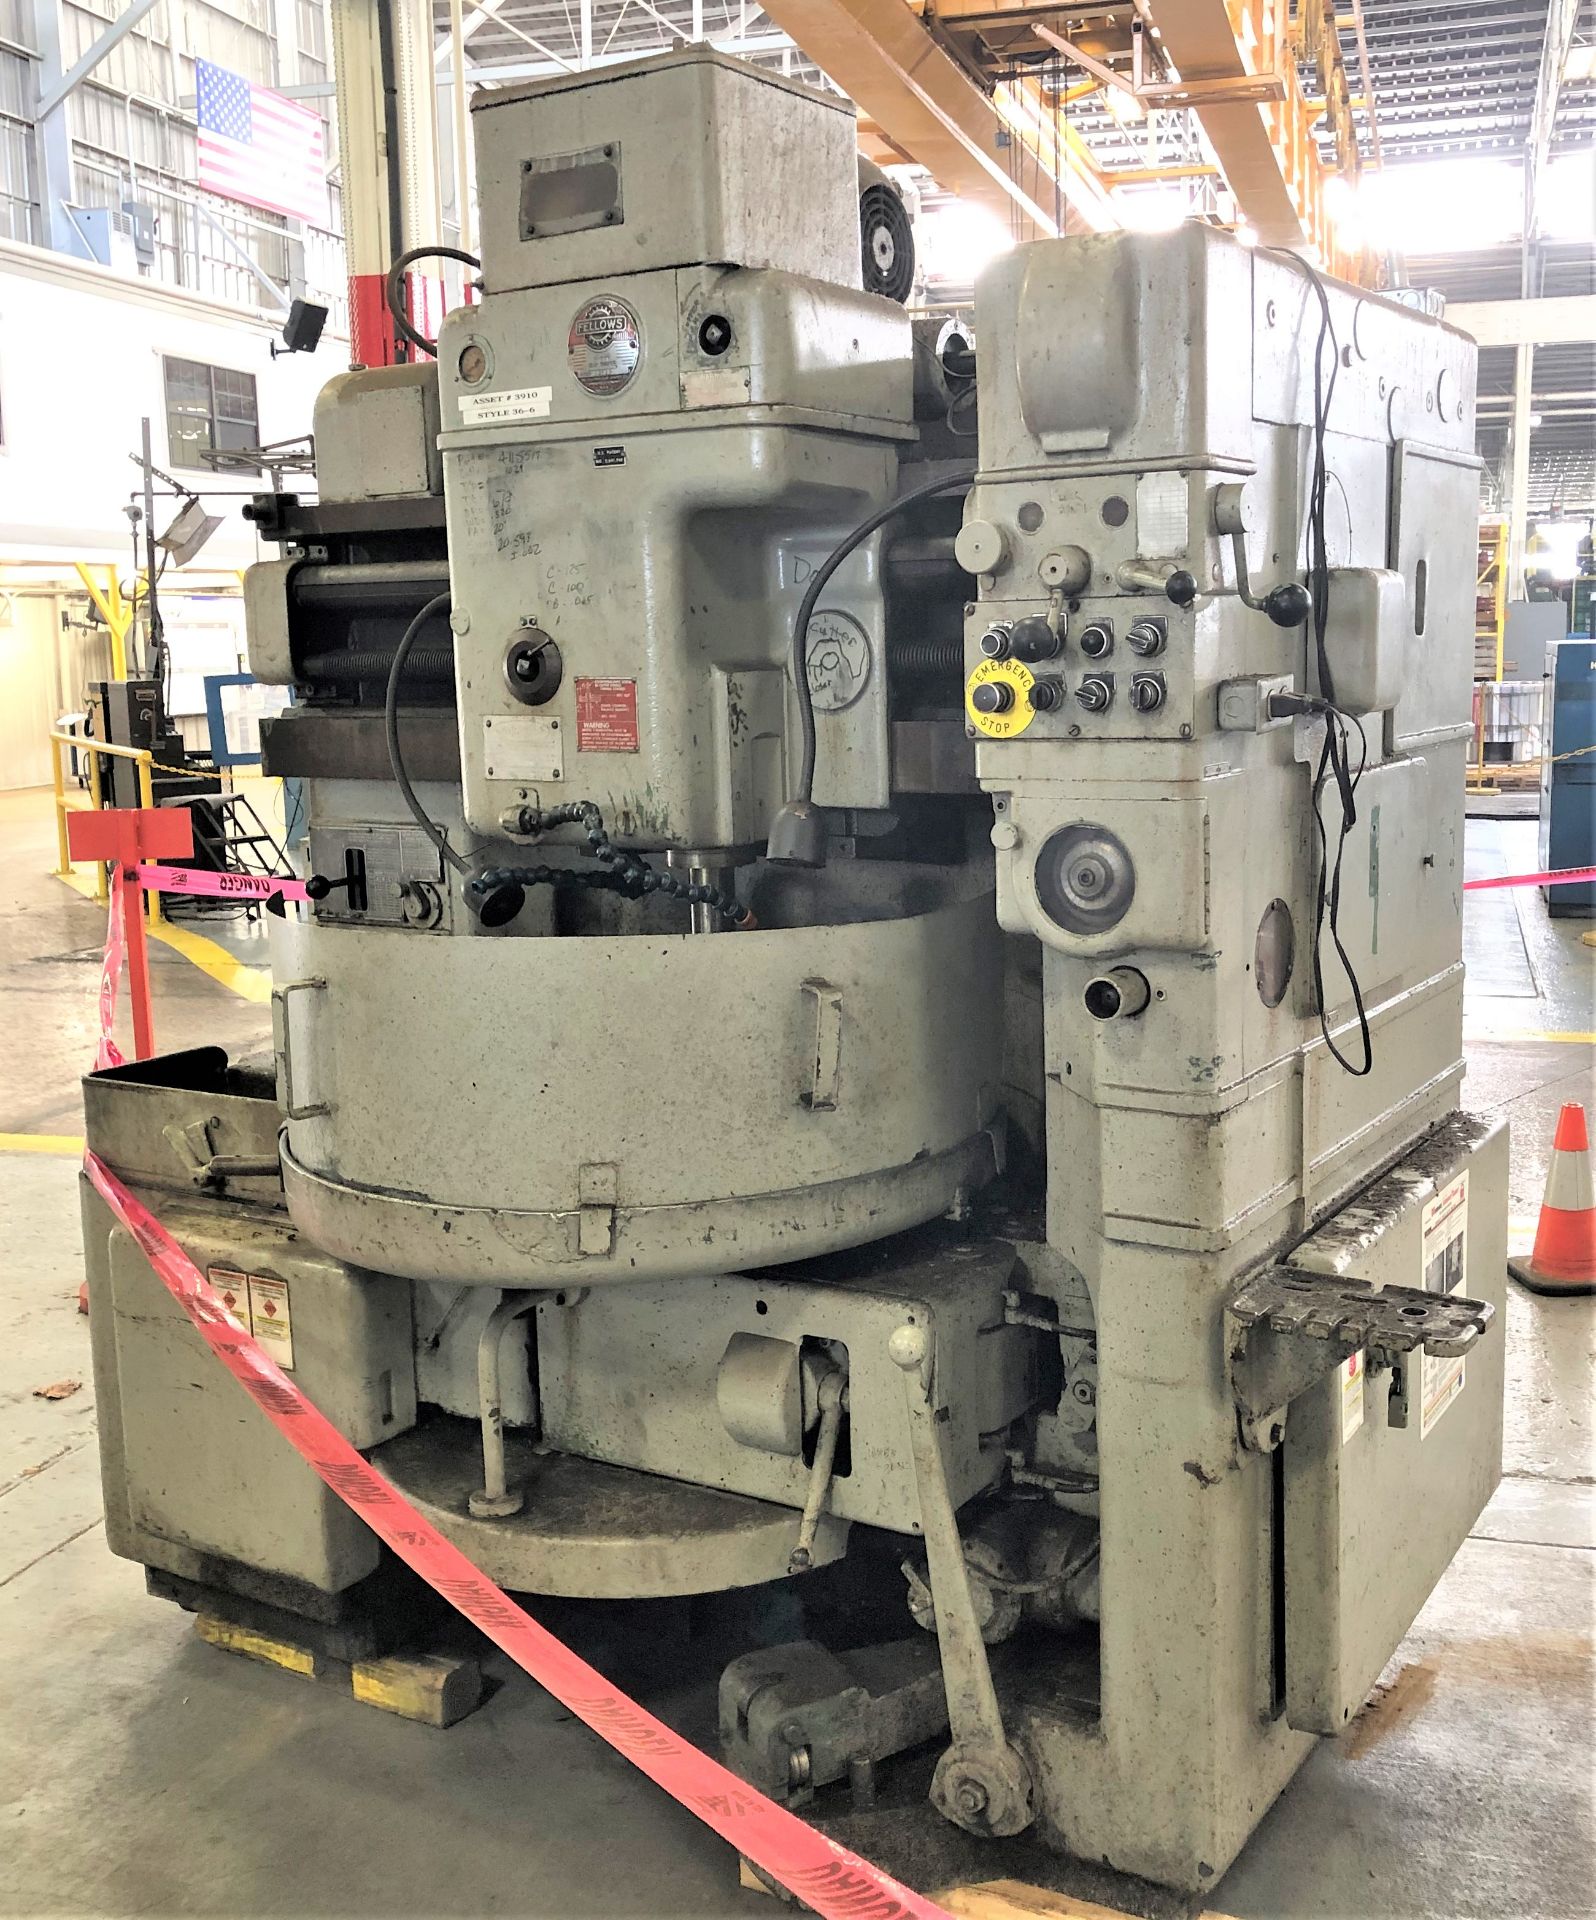 36" Fellows Model 36-6 Vertical Gear Shaper, S/N 33619 Specifications, One (1) - Model No. 36-6 - Image 2 of 7